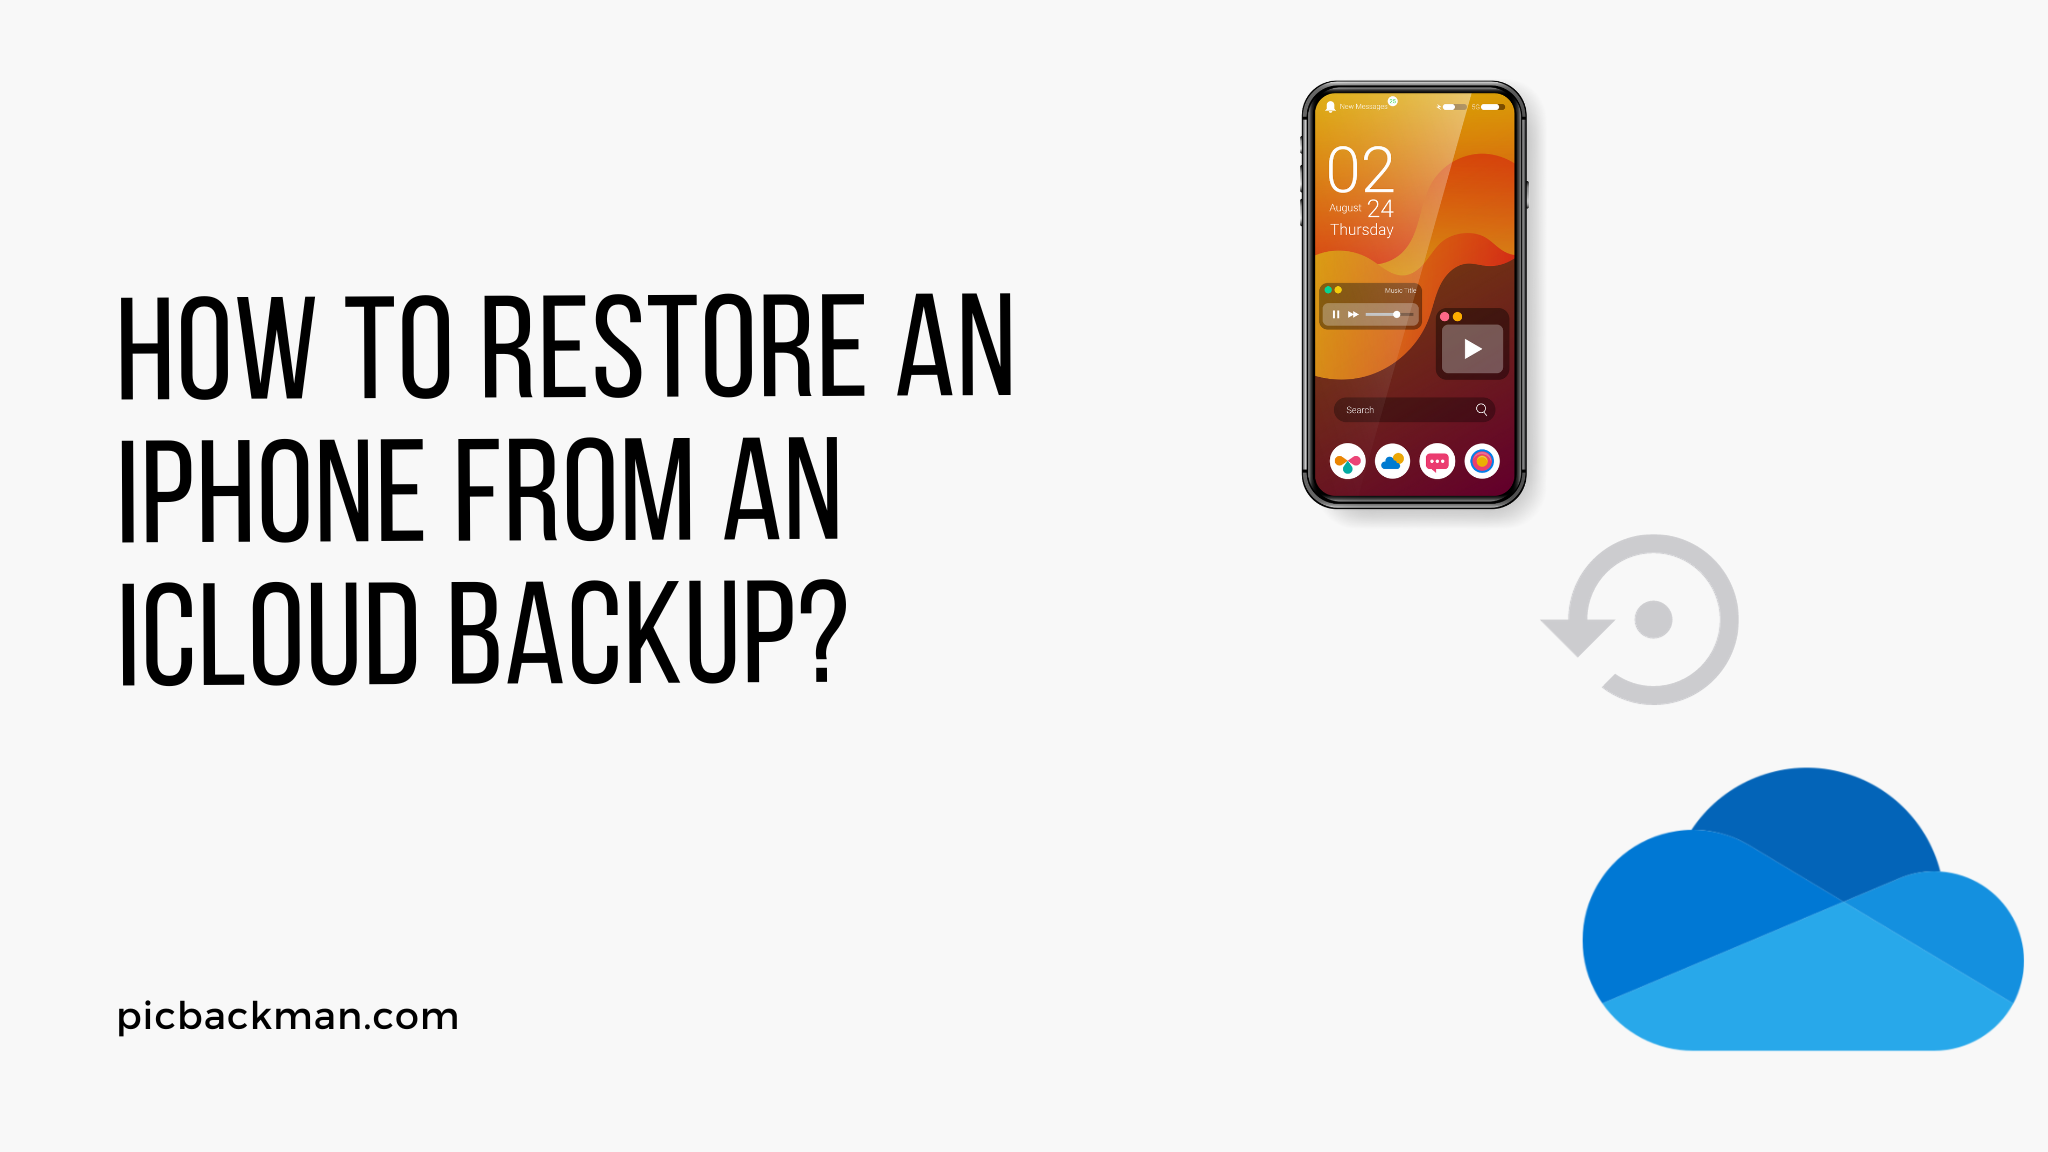 How to Restore an iPhone from an iCloud Backup?